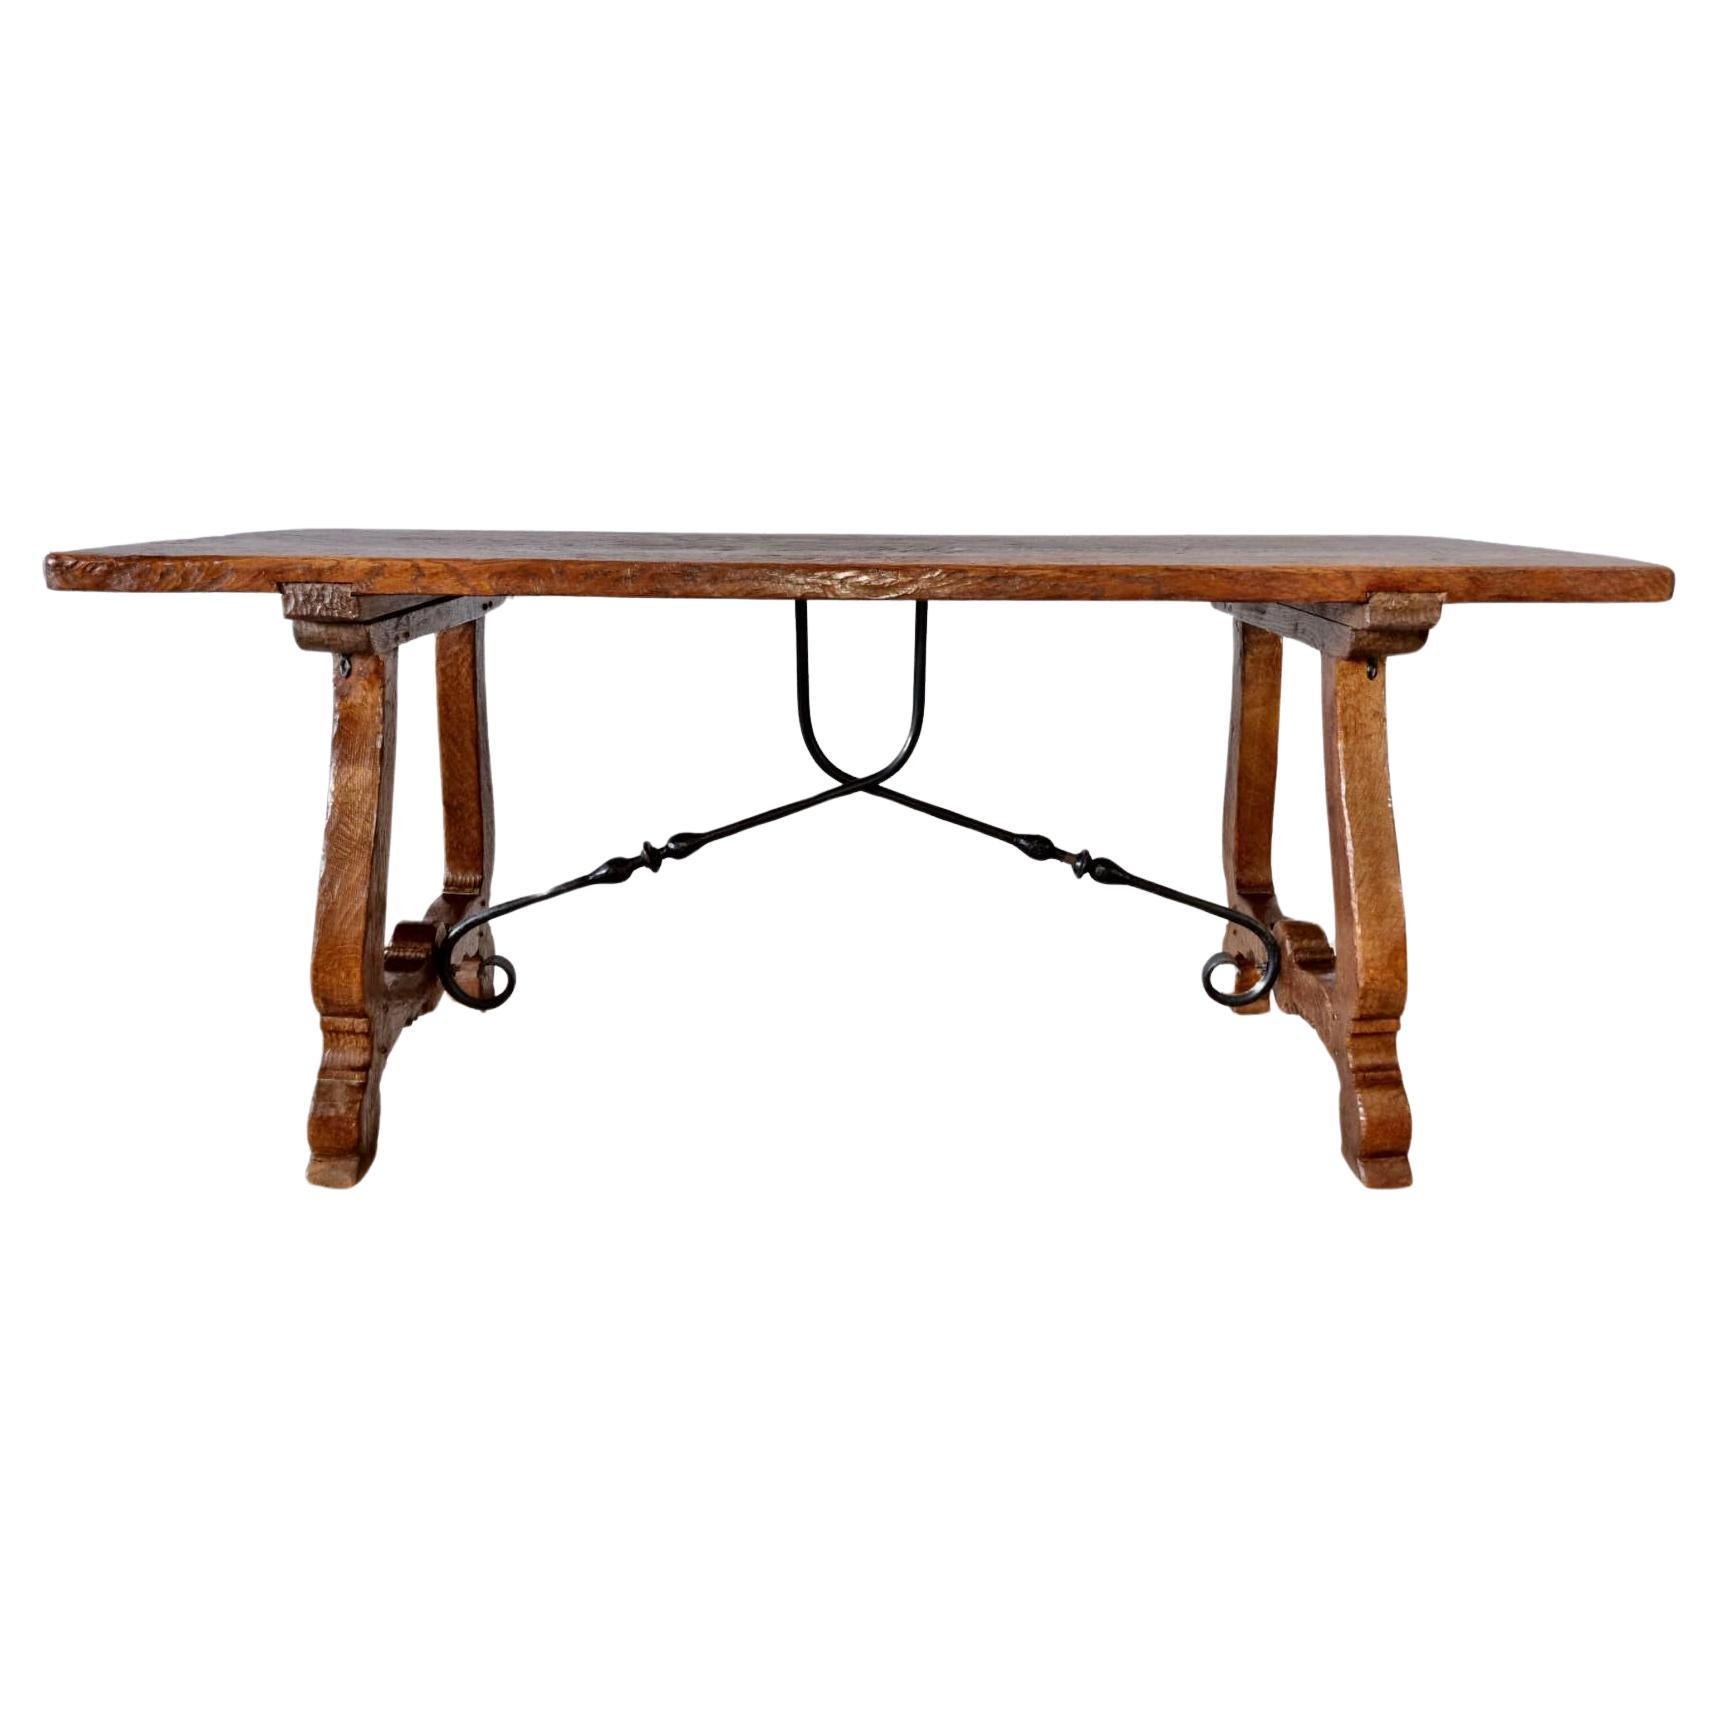 Antique Hand Hewn Spanish Revival Dining Table For Sale